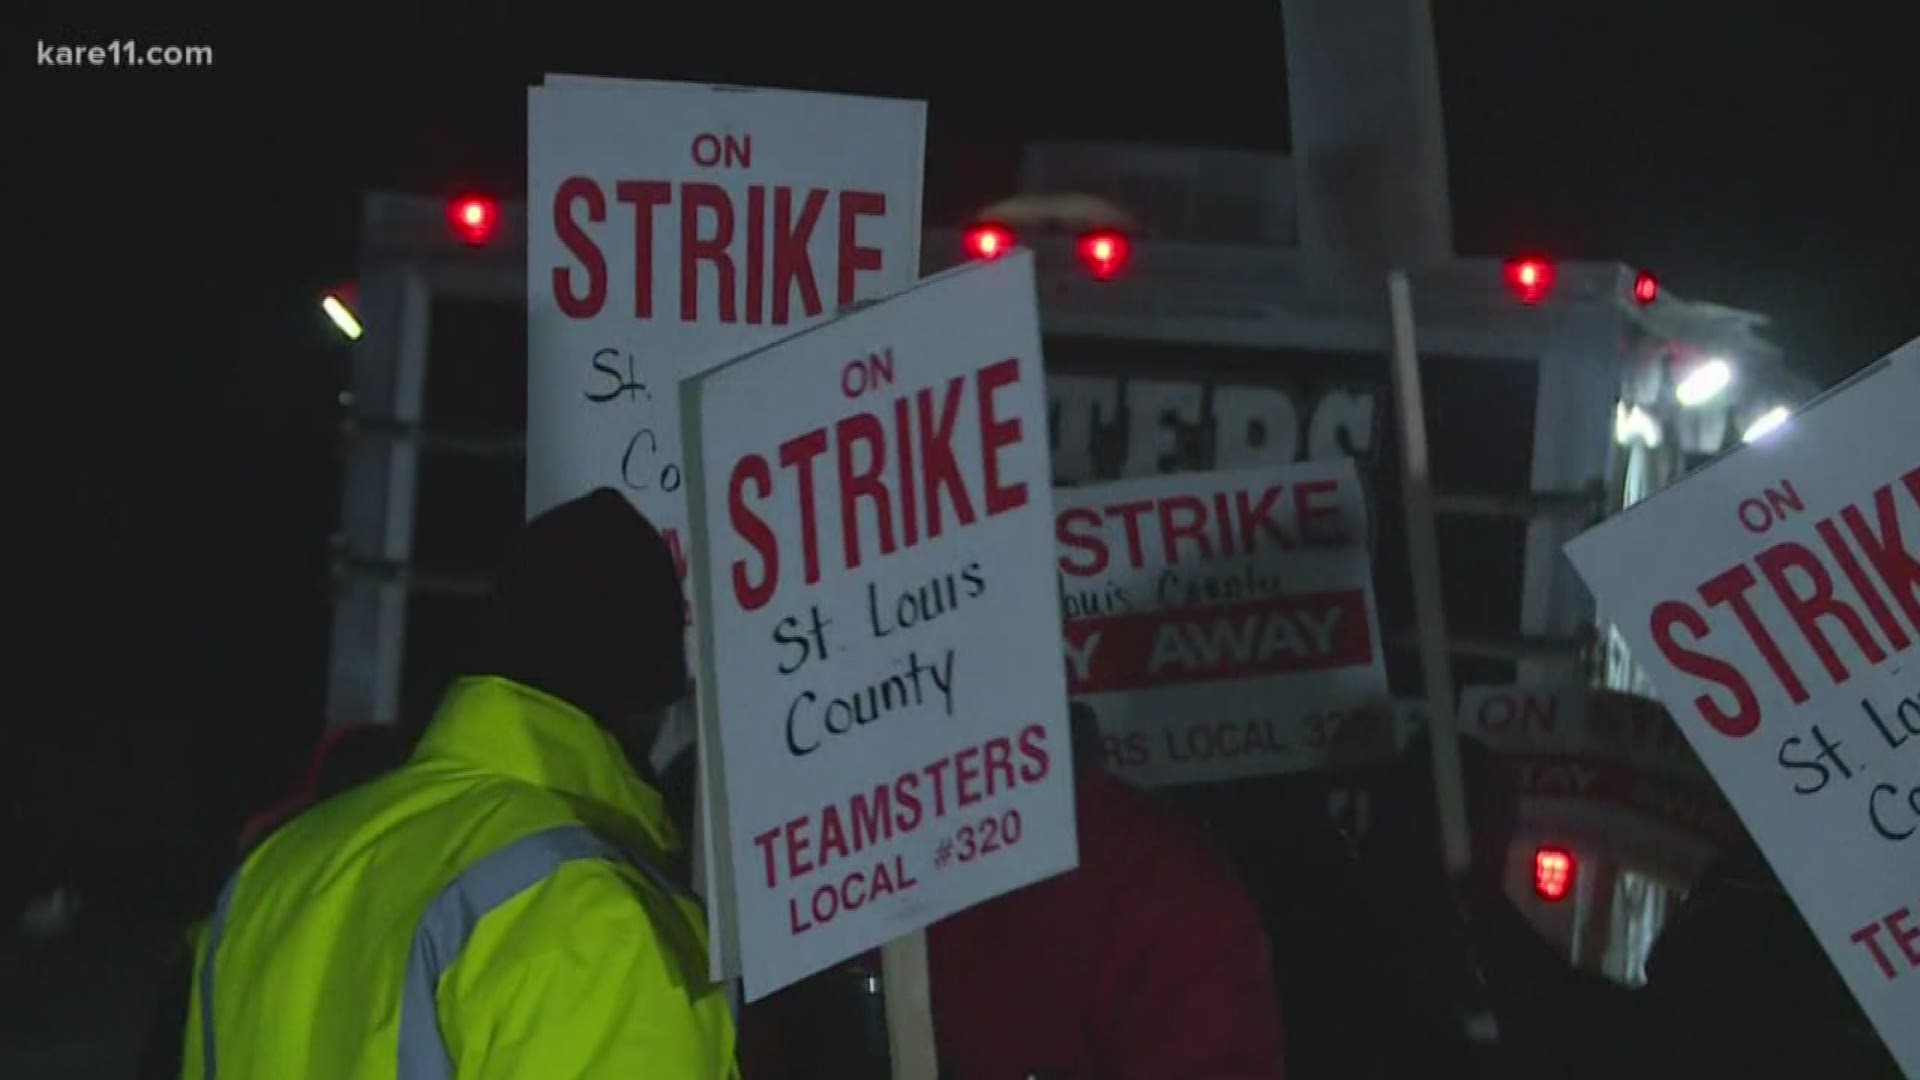 During the strike, supervisors and other licensed employees will plow, but there are fewer of them and the county says it will take longer to get to all the roads.